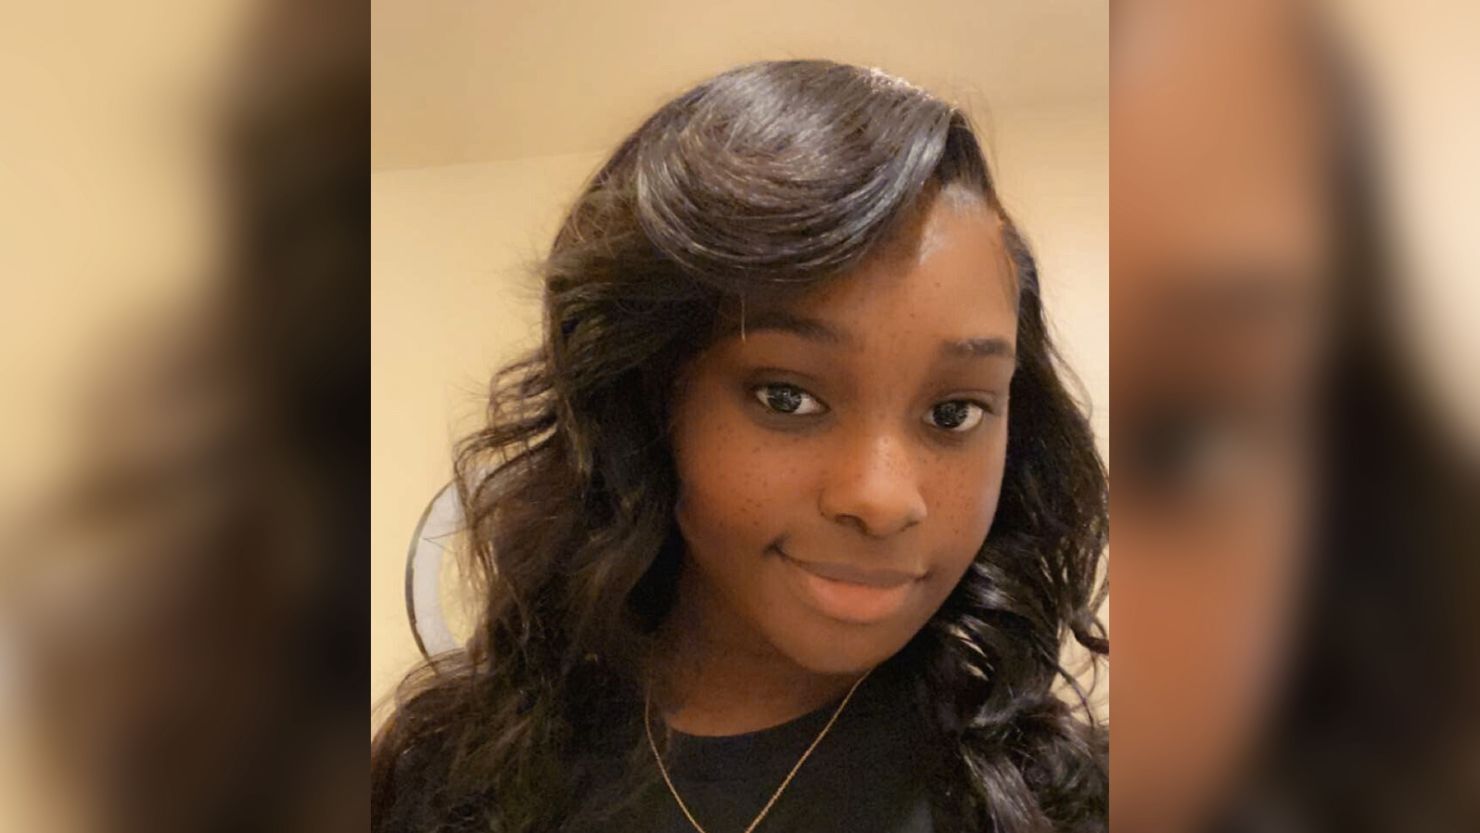 Saniyya Dennis disappeared from SUNY Buffalo State College on April 24, officials said.